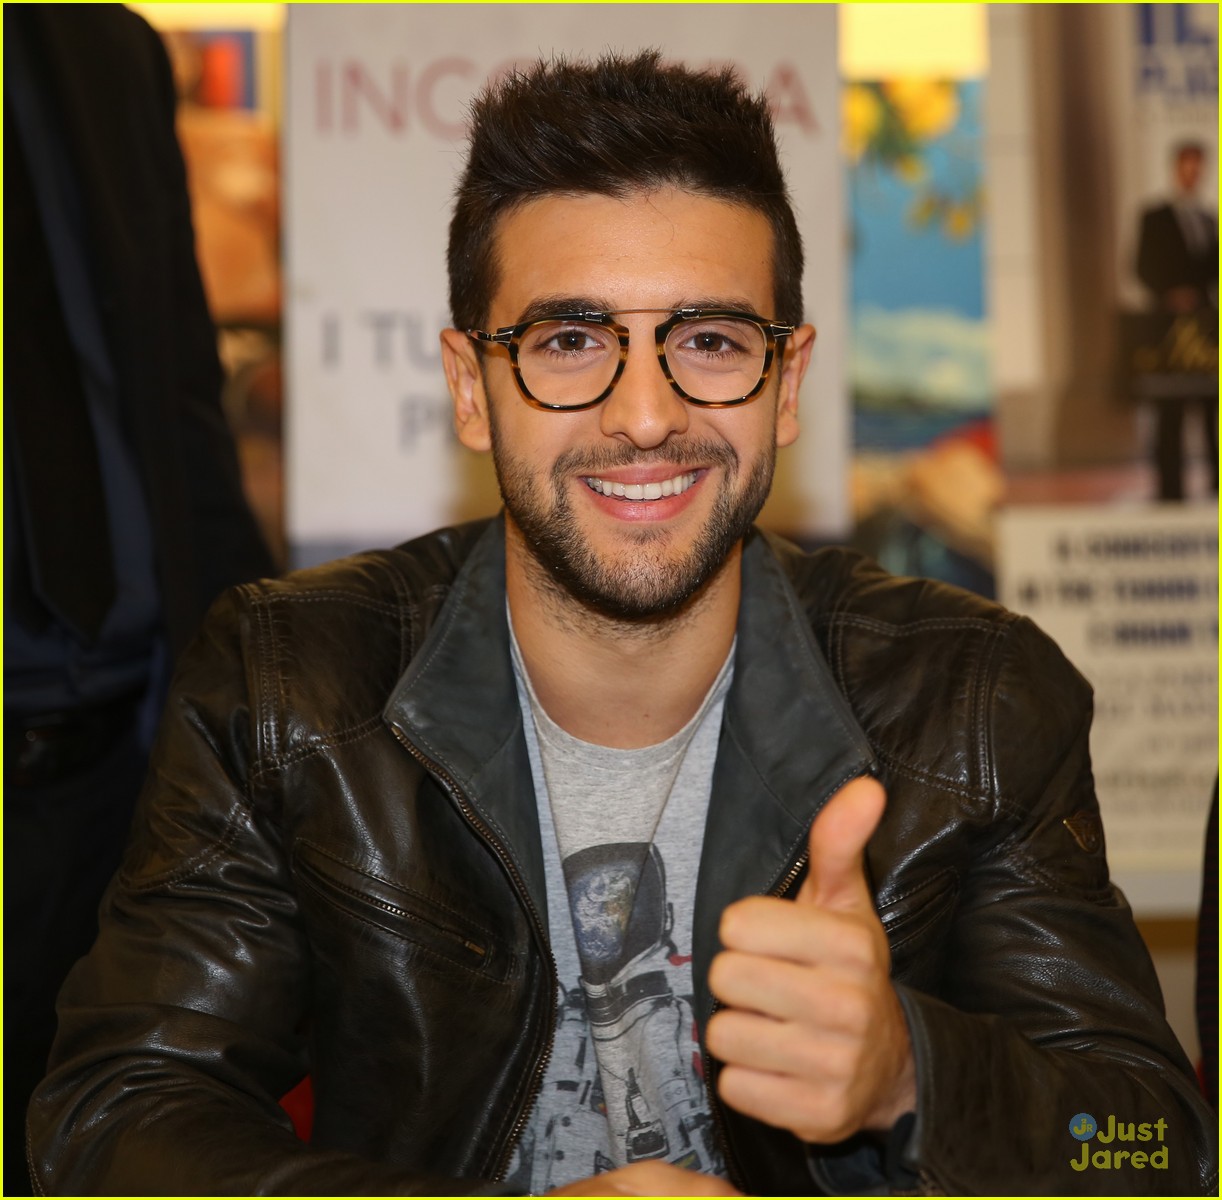 Il Volo Meet Fans Young & Old During Album Signing in Italy | Photo ...